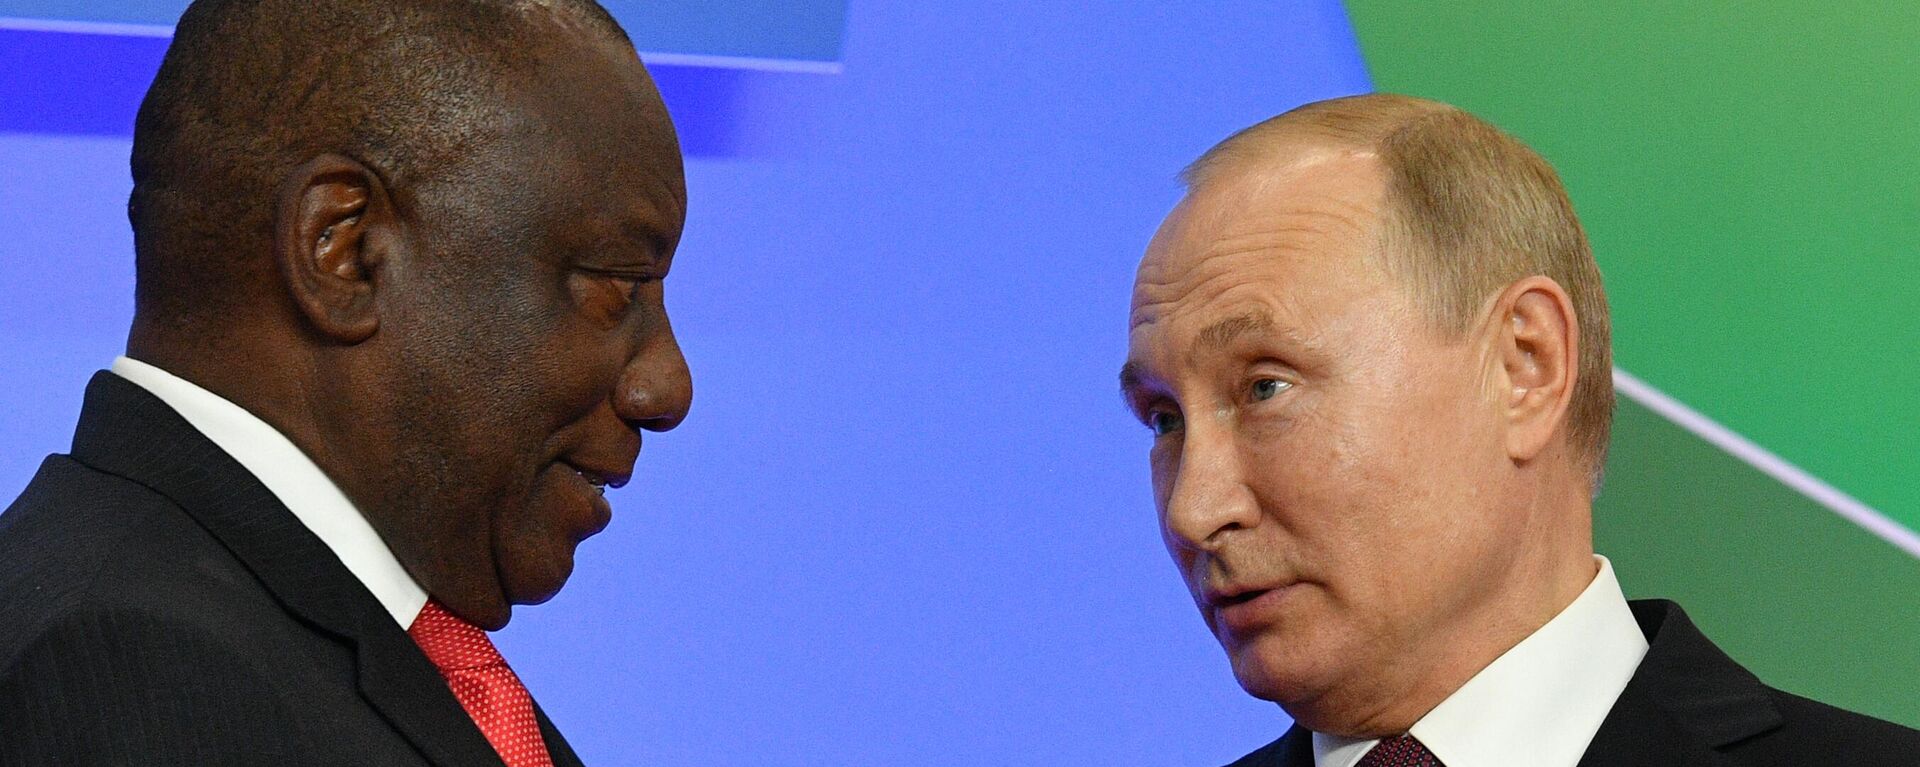 Russian President Vladimir Putin and South African President Cyril Ramaphosa attend an official welcome ceremony for Heads of State and Government at the 2019 Russia-Africa Summit and Economic Forum in Sochi, Russia. 23.10.19 - Sputnik Africa, 1920, 31.01.2024